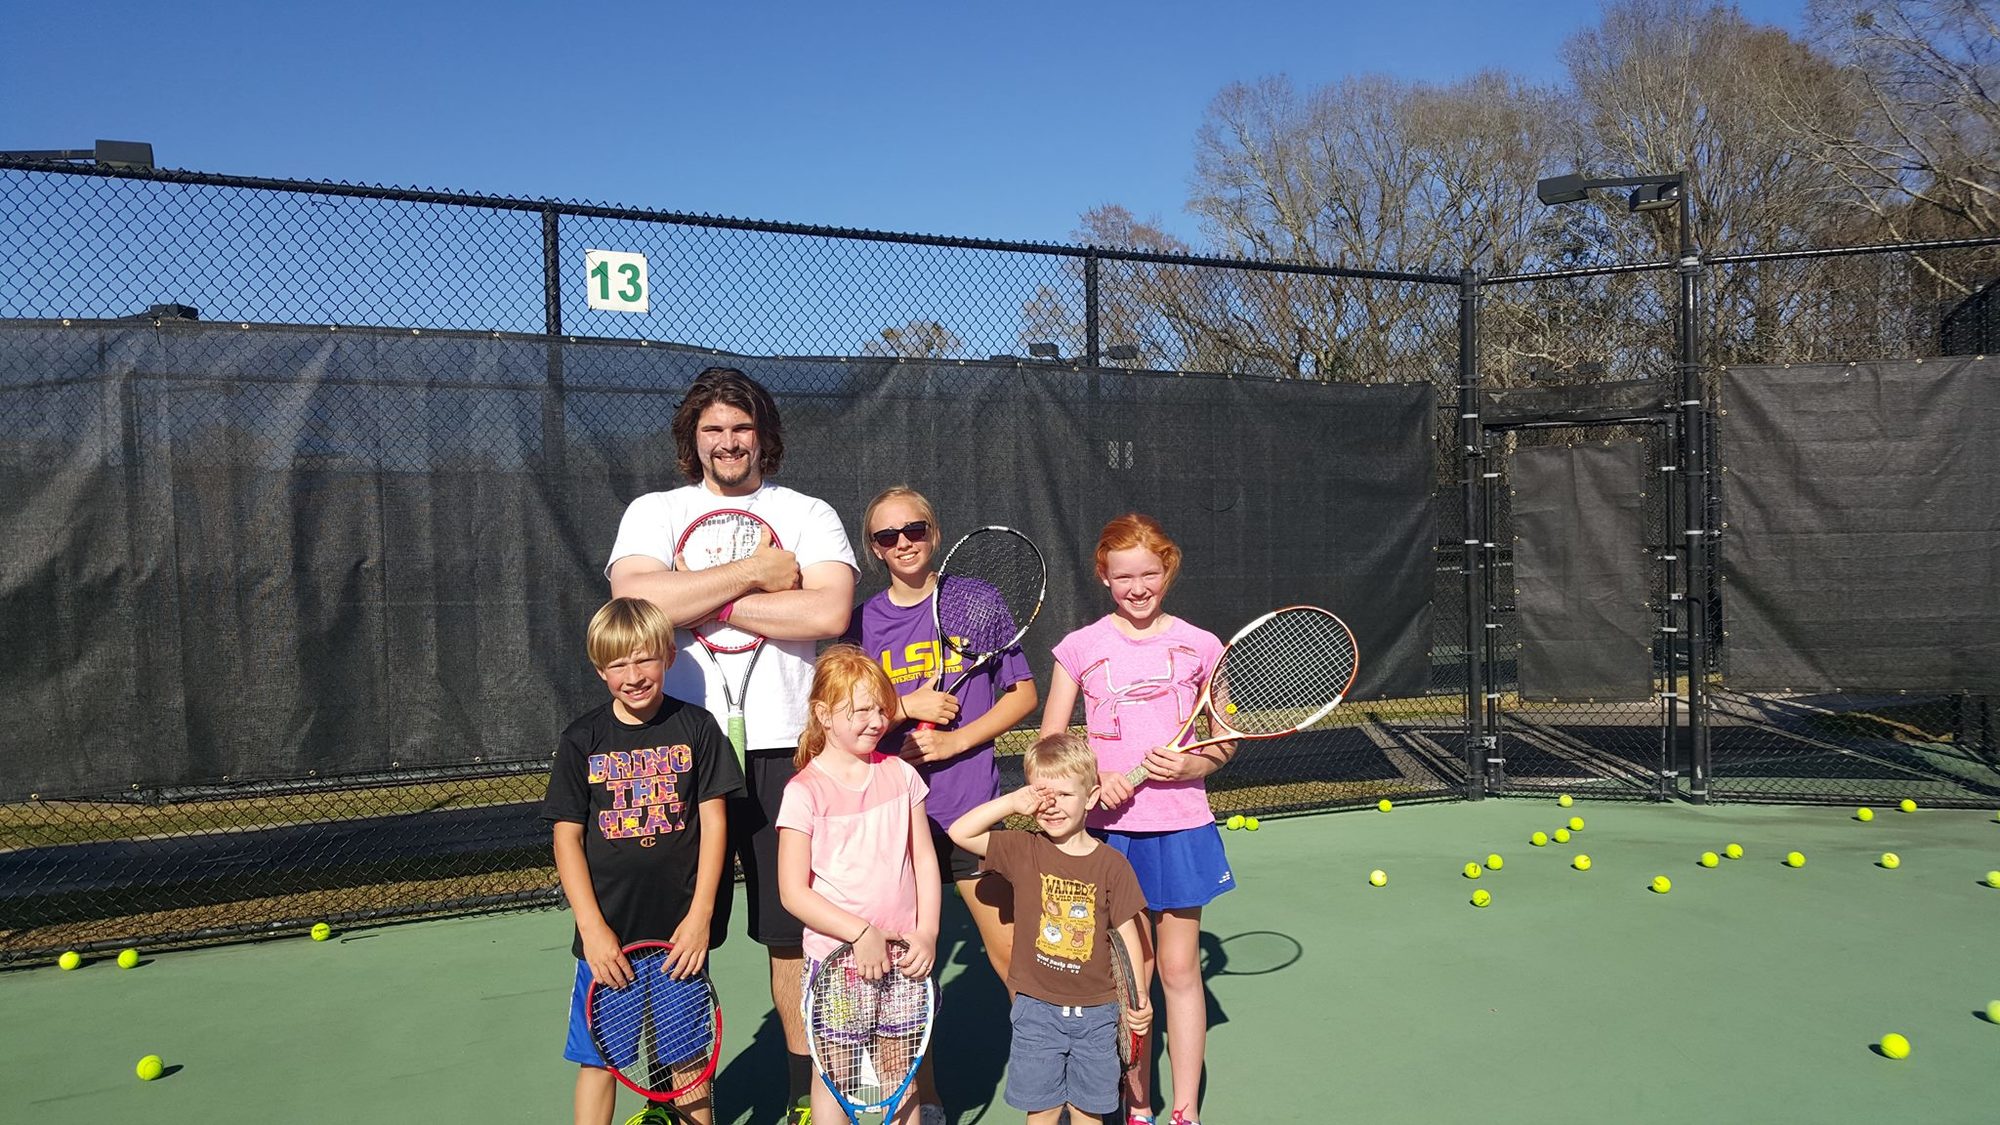 Henry A. teaches tennis lessons in Baton Rouge, LA